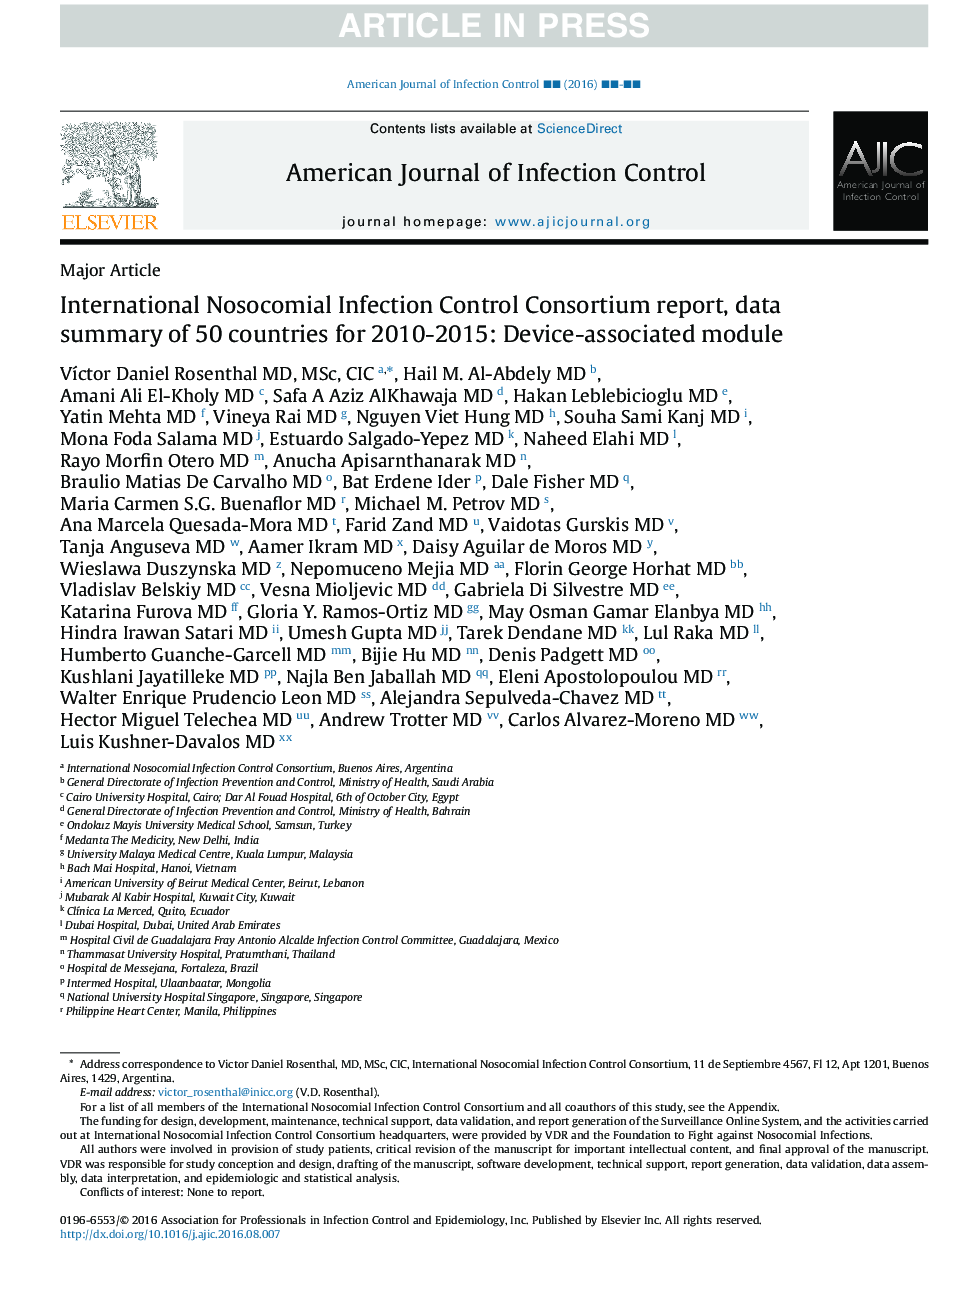 International Nosocomial Infection Control Consortium report, data summary of 50 countries for 2010-2015: Device-associated module